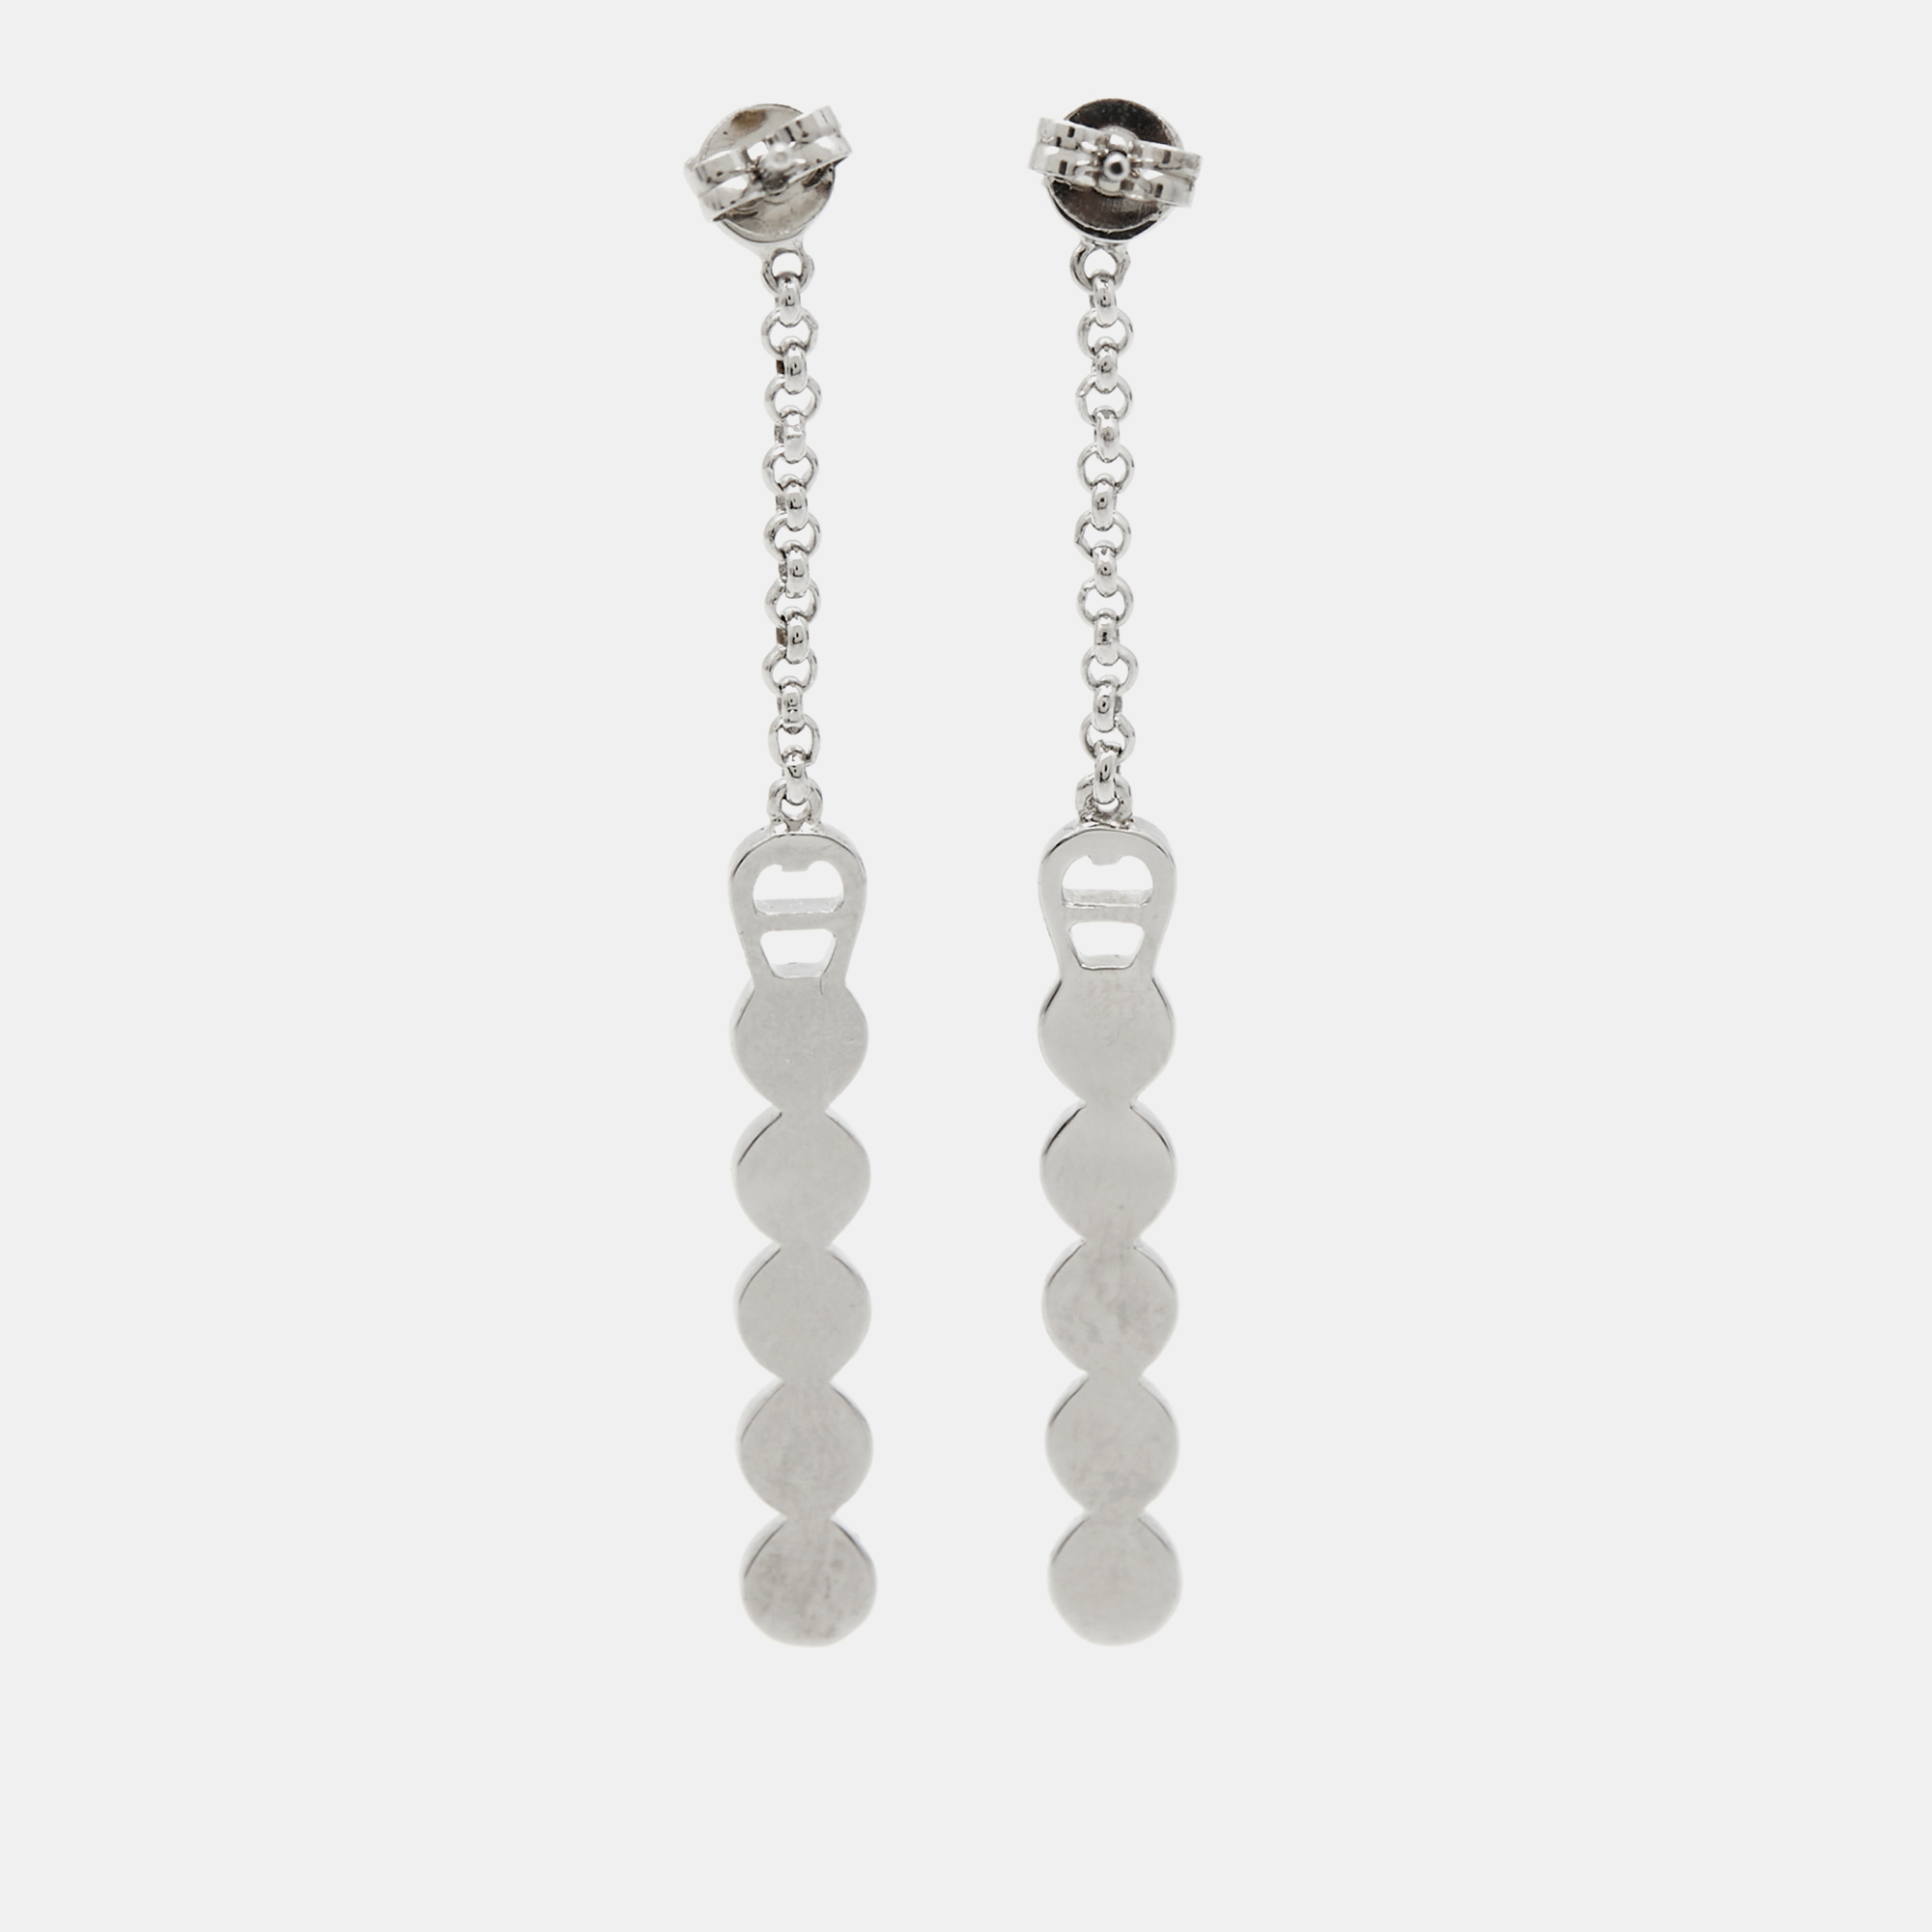 Aigner Crystals Silver Tone Earrings